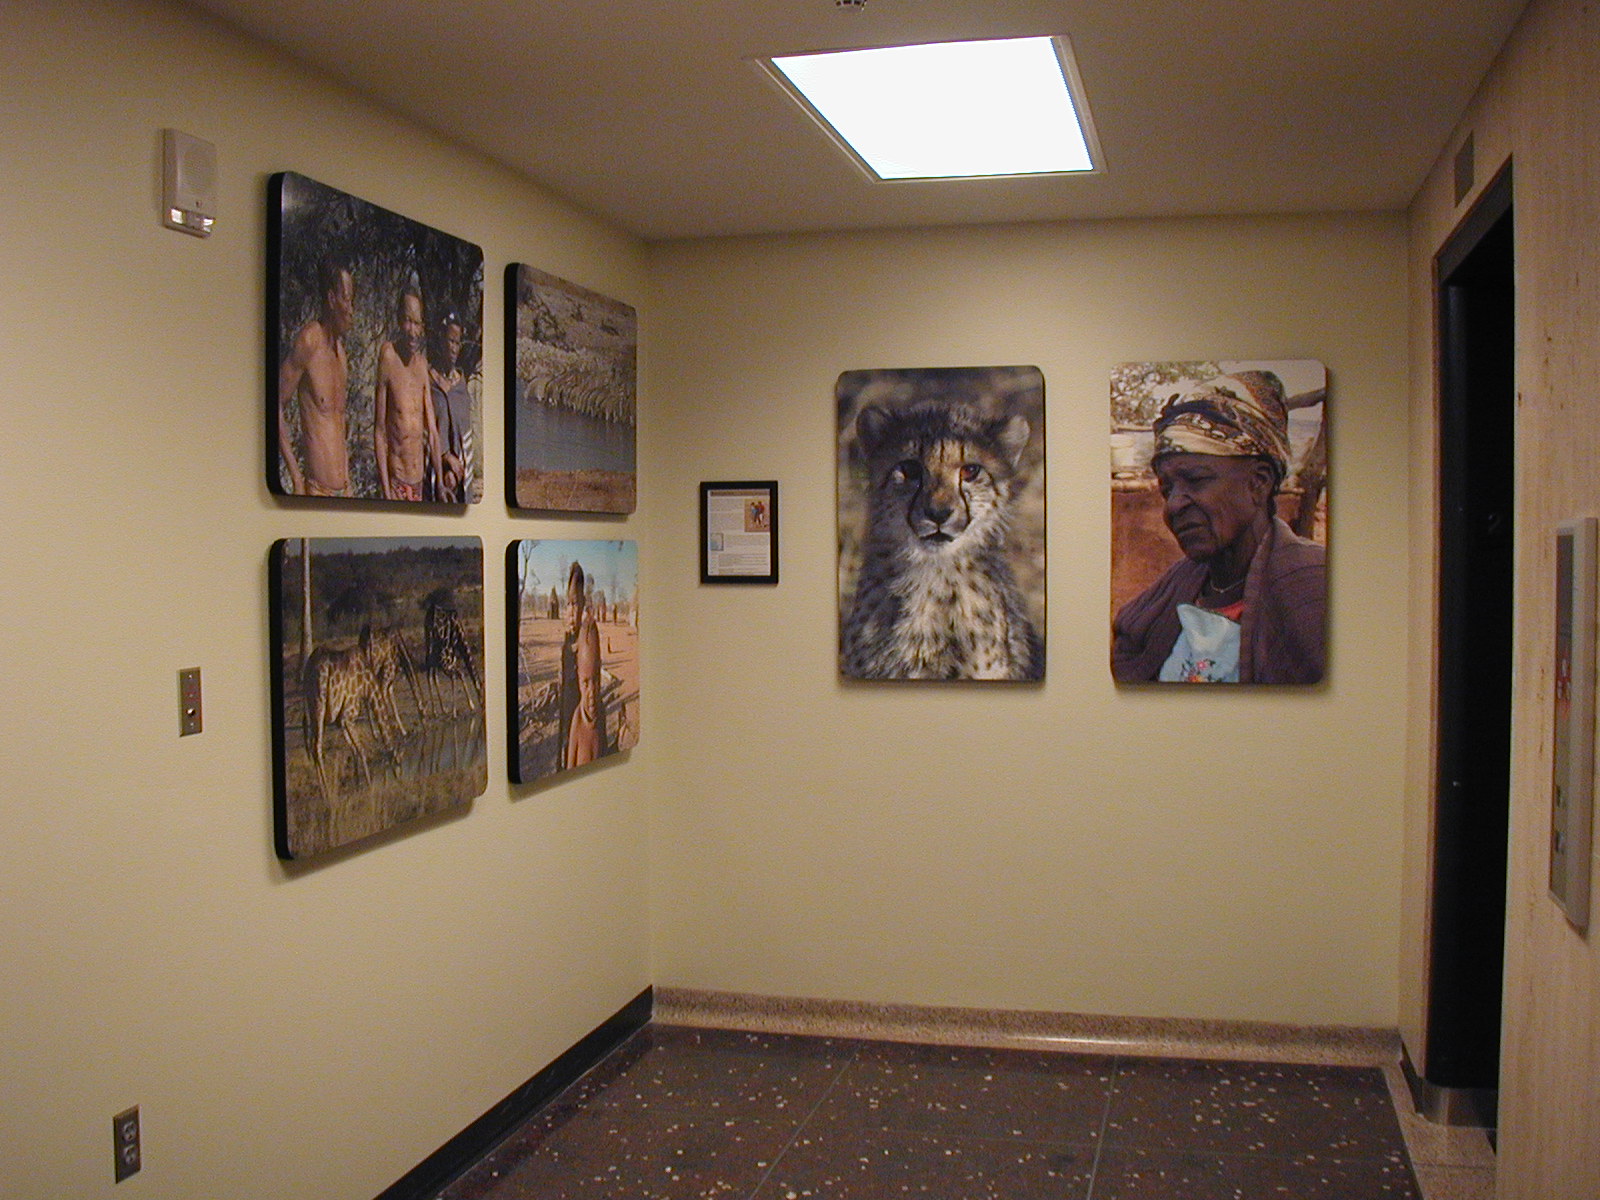 Photos from Larkin Powell's trip to Namibia are the first exhibit in the second floor elevator lobby gallery.